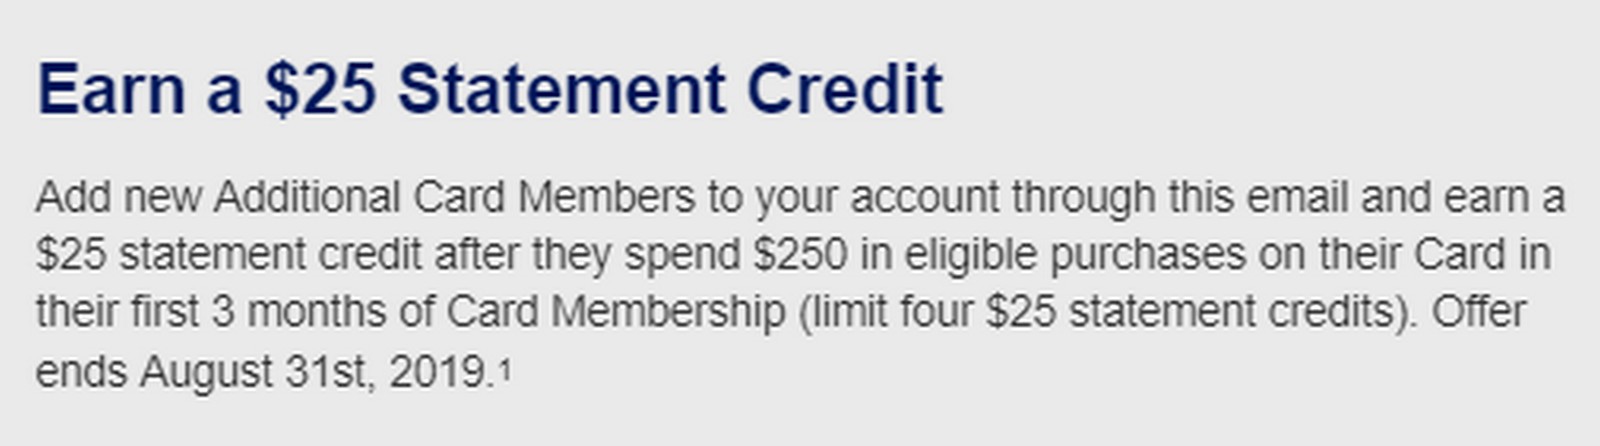 Amex Authorized User Spending Offers Are Back